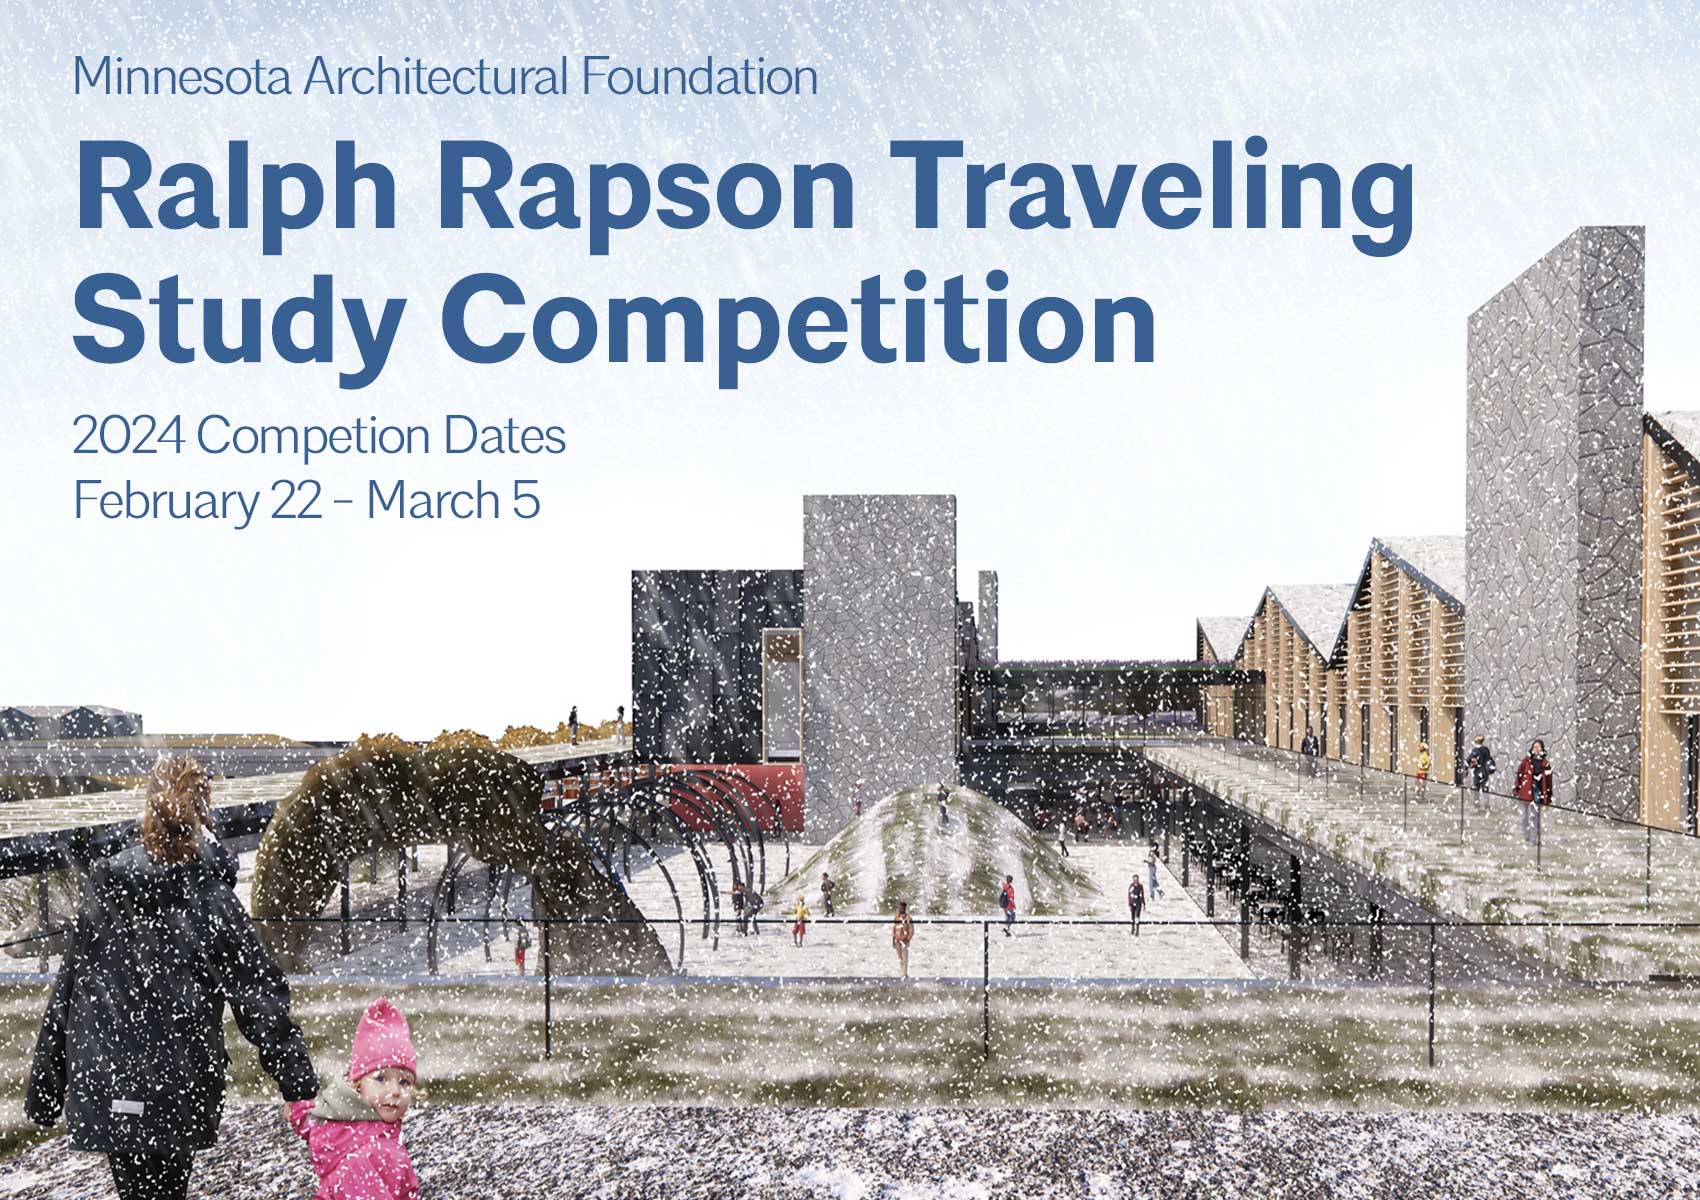 Ralph Rapson Traveling Study Award Competition Application Period